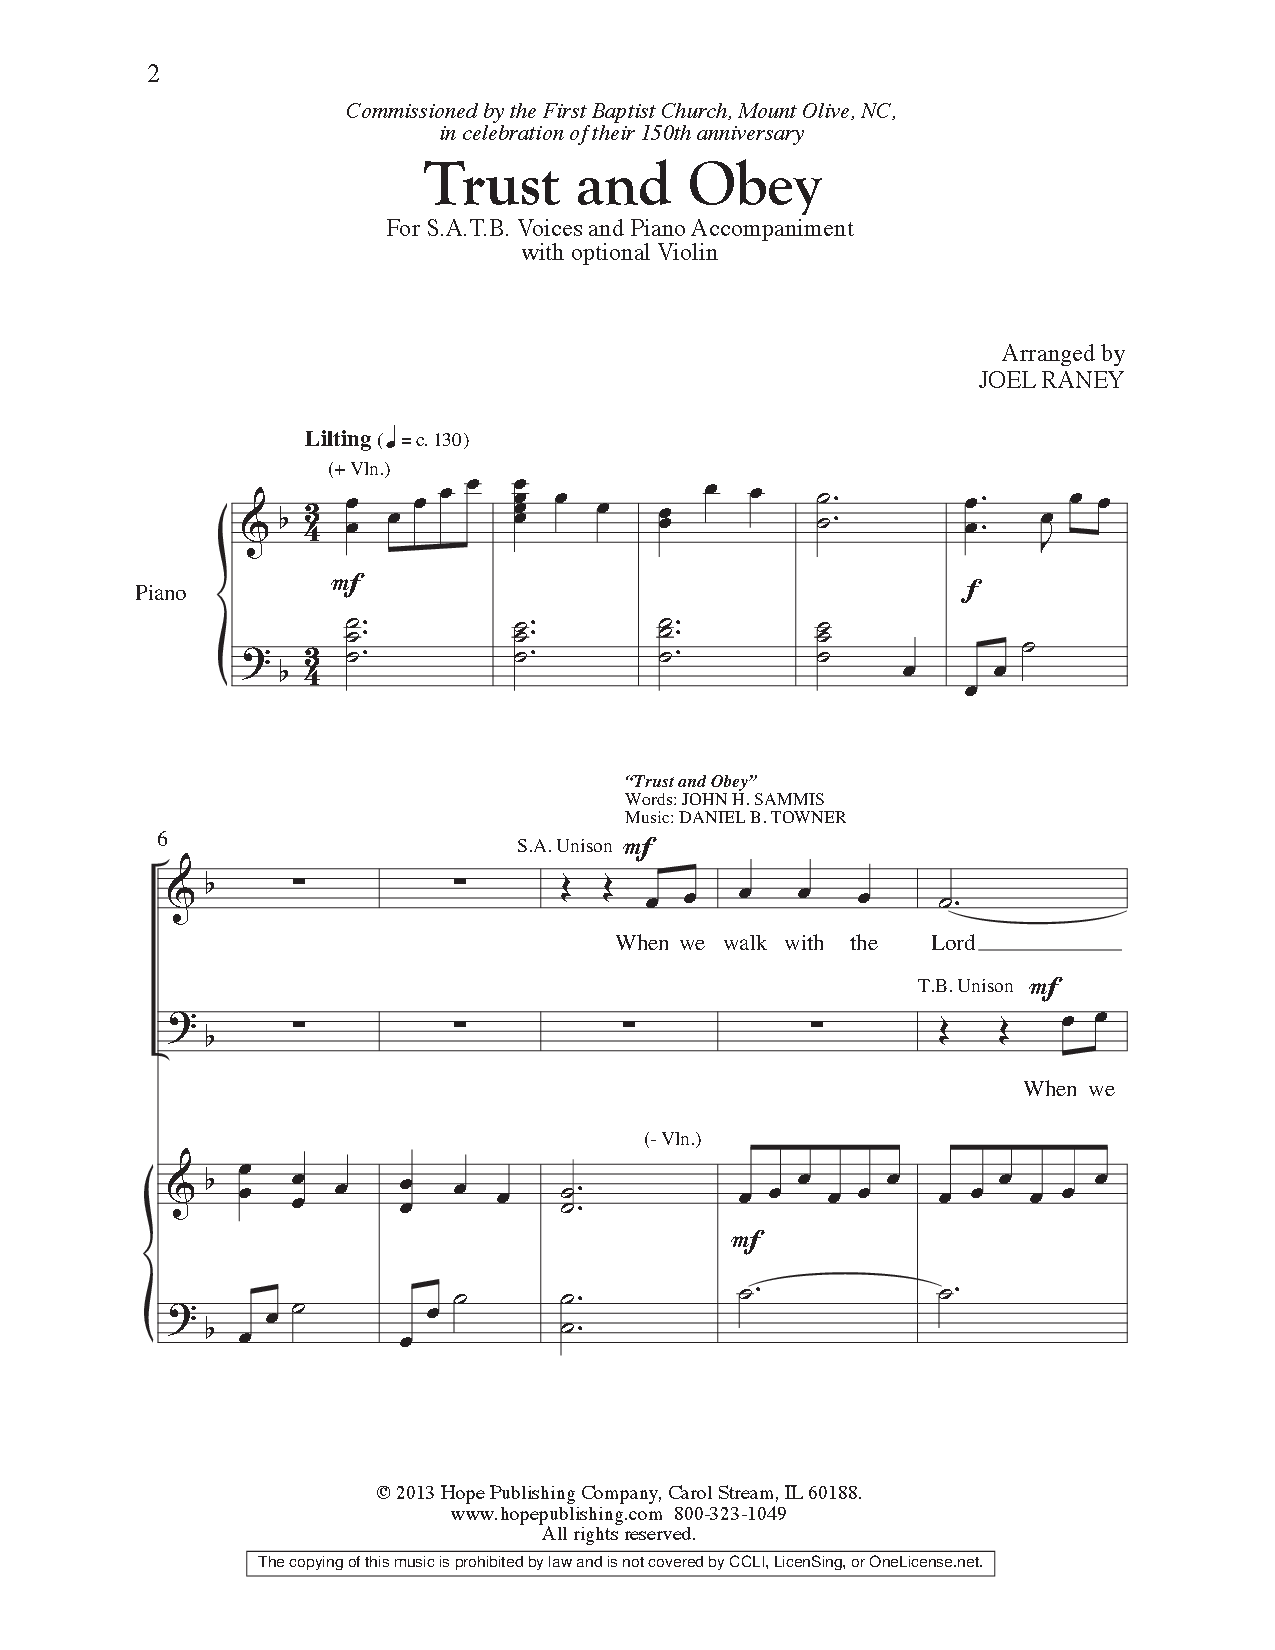 Trust and Obey (SATB with opt. Violin) by Jo | J.W. Pepper Sheet Music